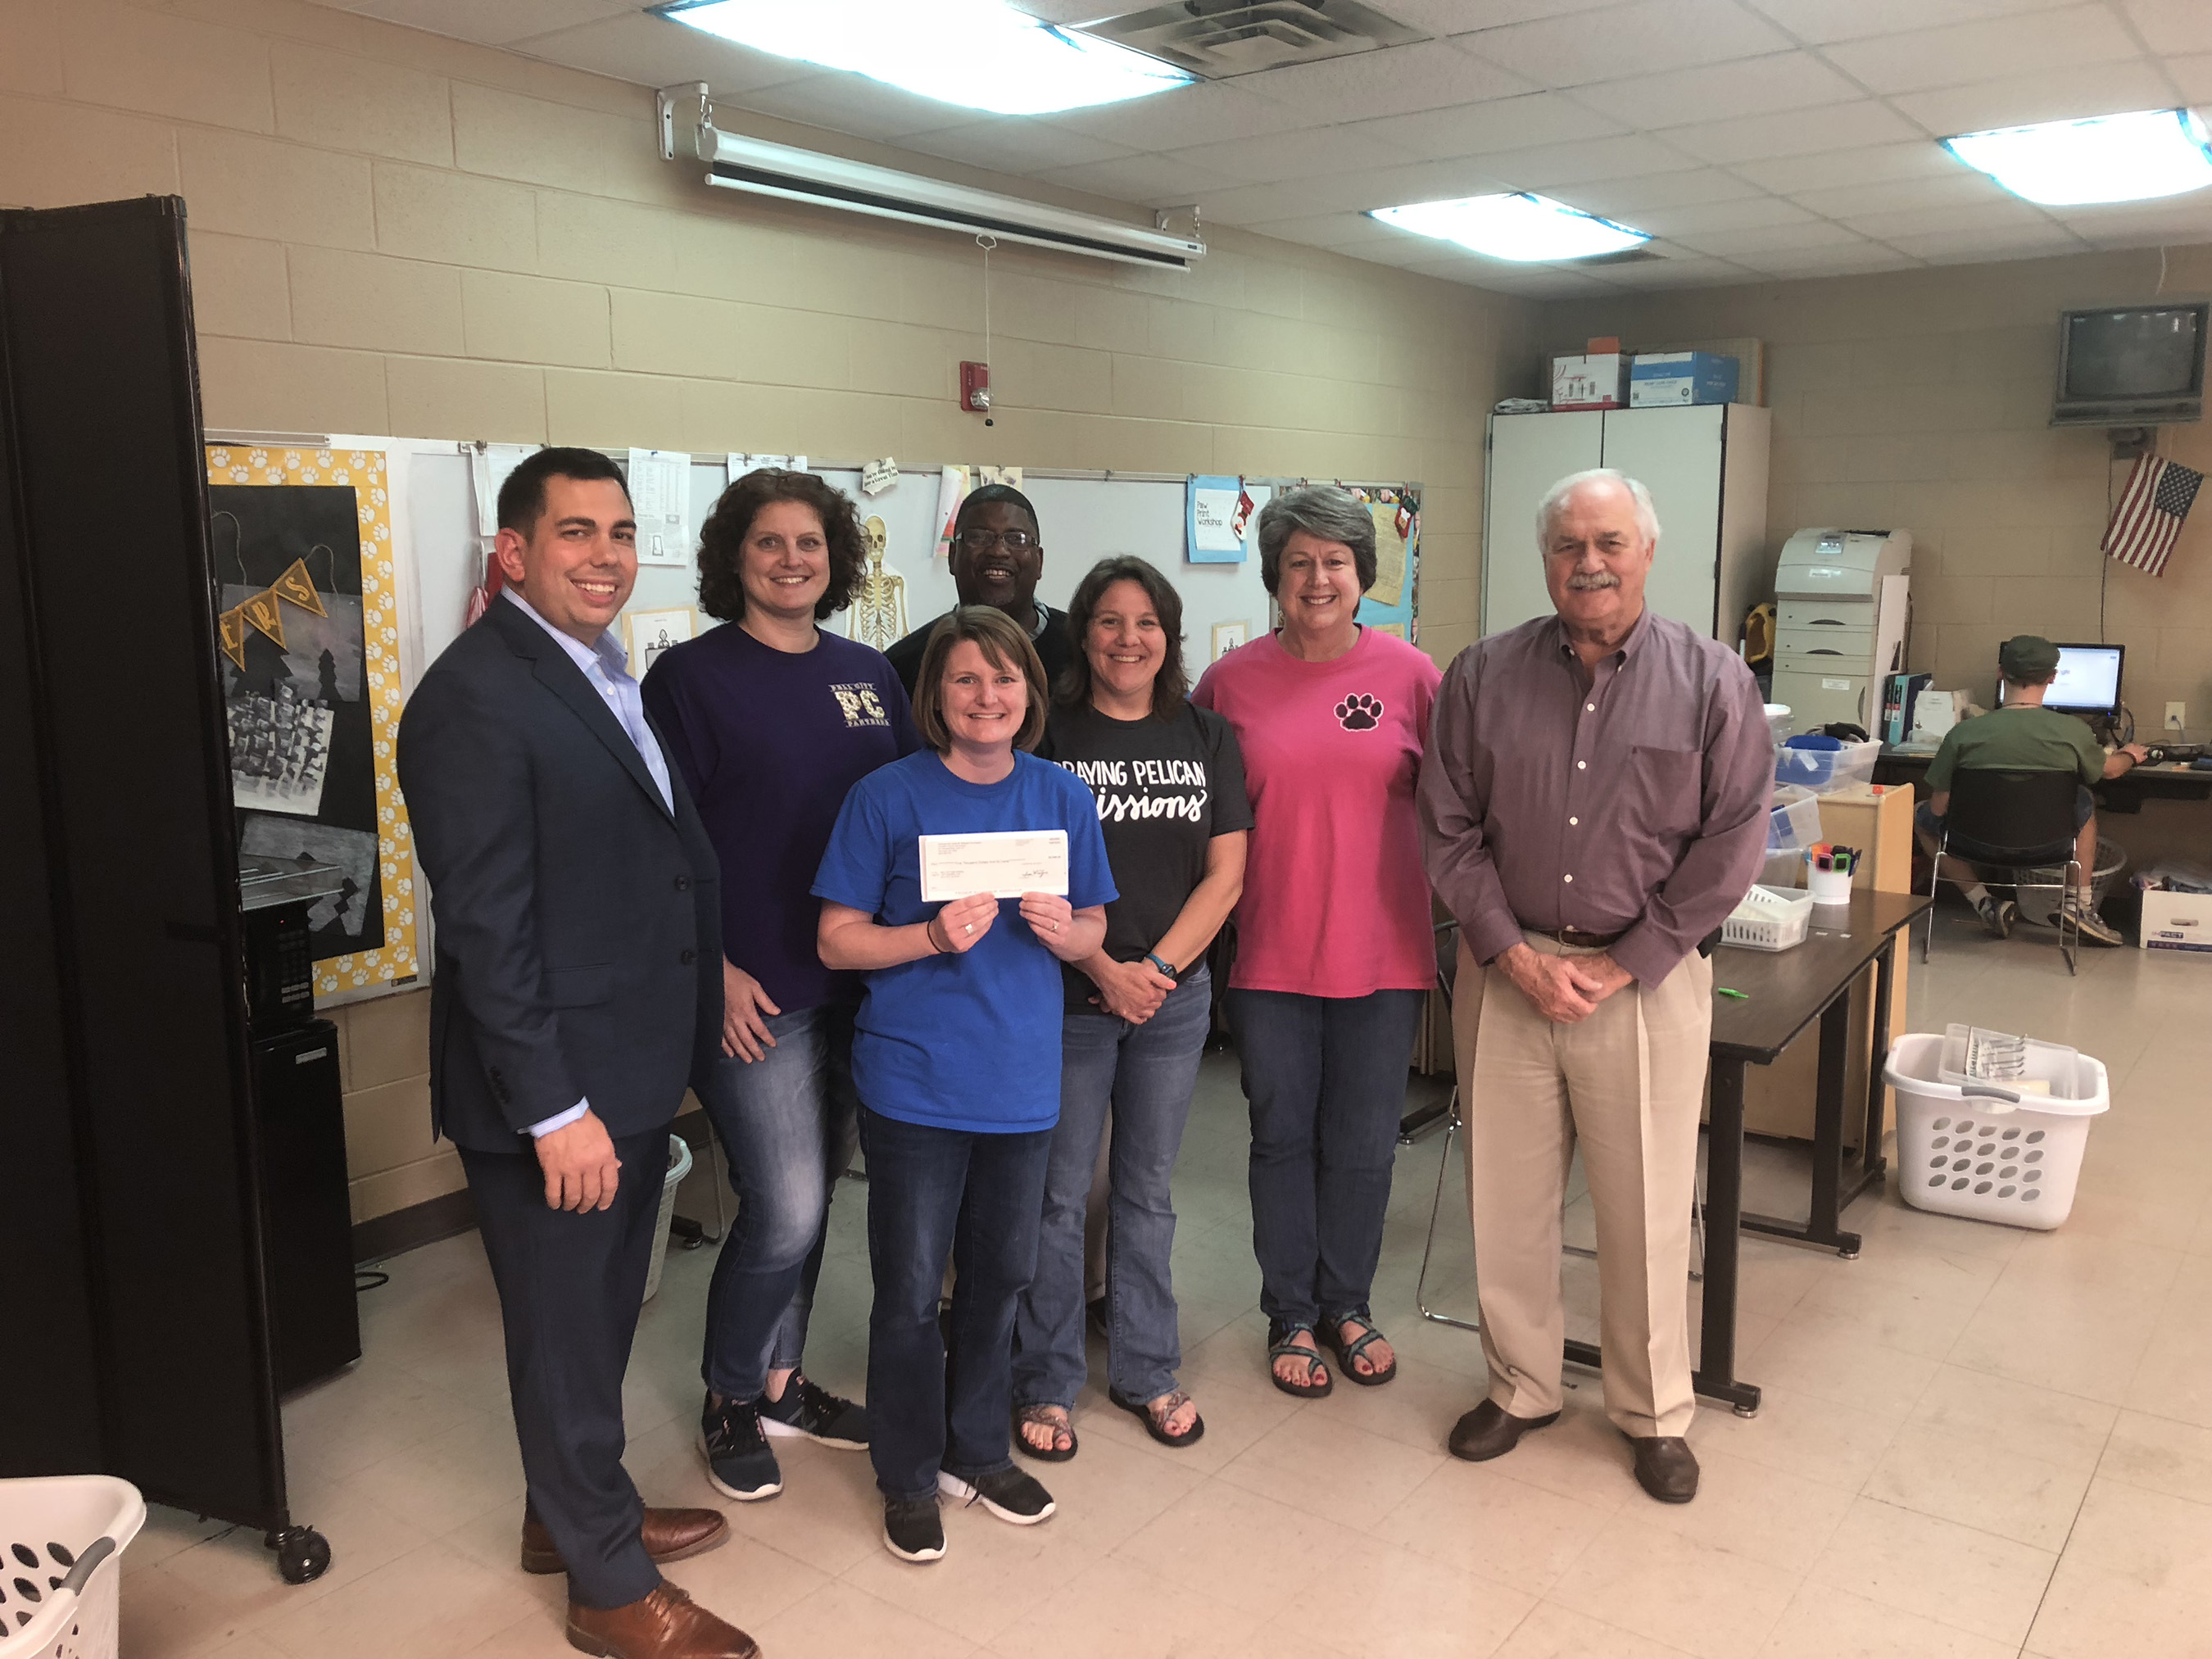 The $5,000 CenturyLink grant awarded to Pell City (Alabama) High School will be used in a project titled “Accessing Digital Learning with Chromebooks.” Accepting the grant check are (from left) Brent Beal, Christy Gunn, winning teacher Amy Beck, Jackie Wyche, Windy Jones, Kelly Smith and Alabama State Representative Randy Wood.